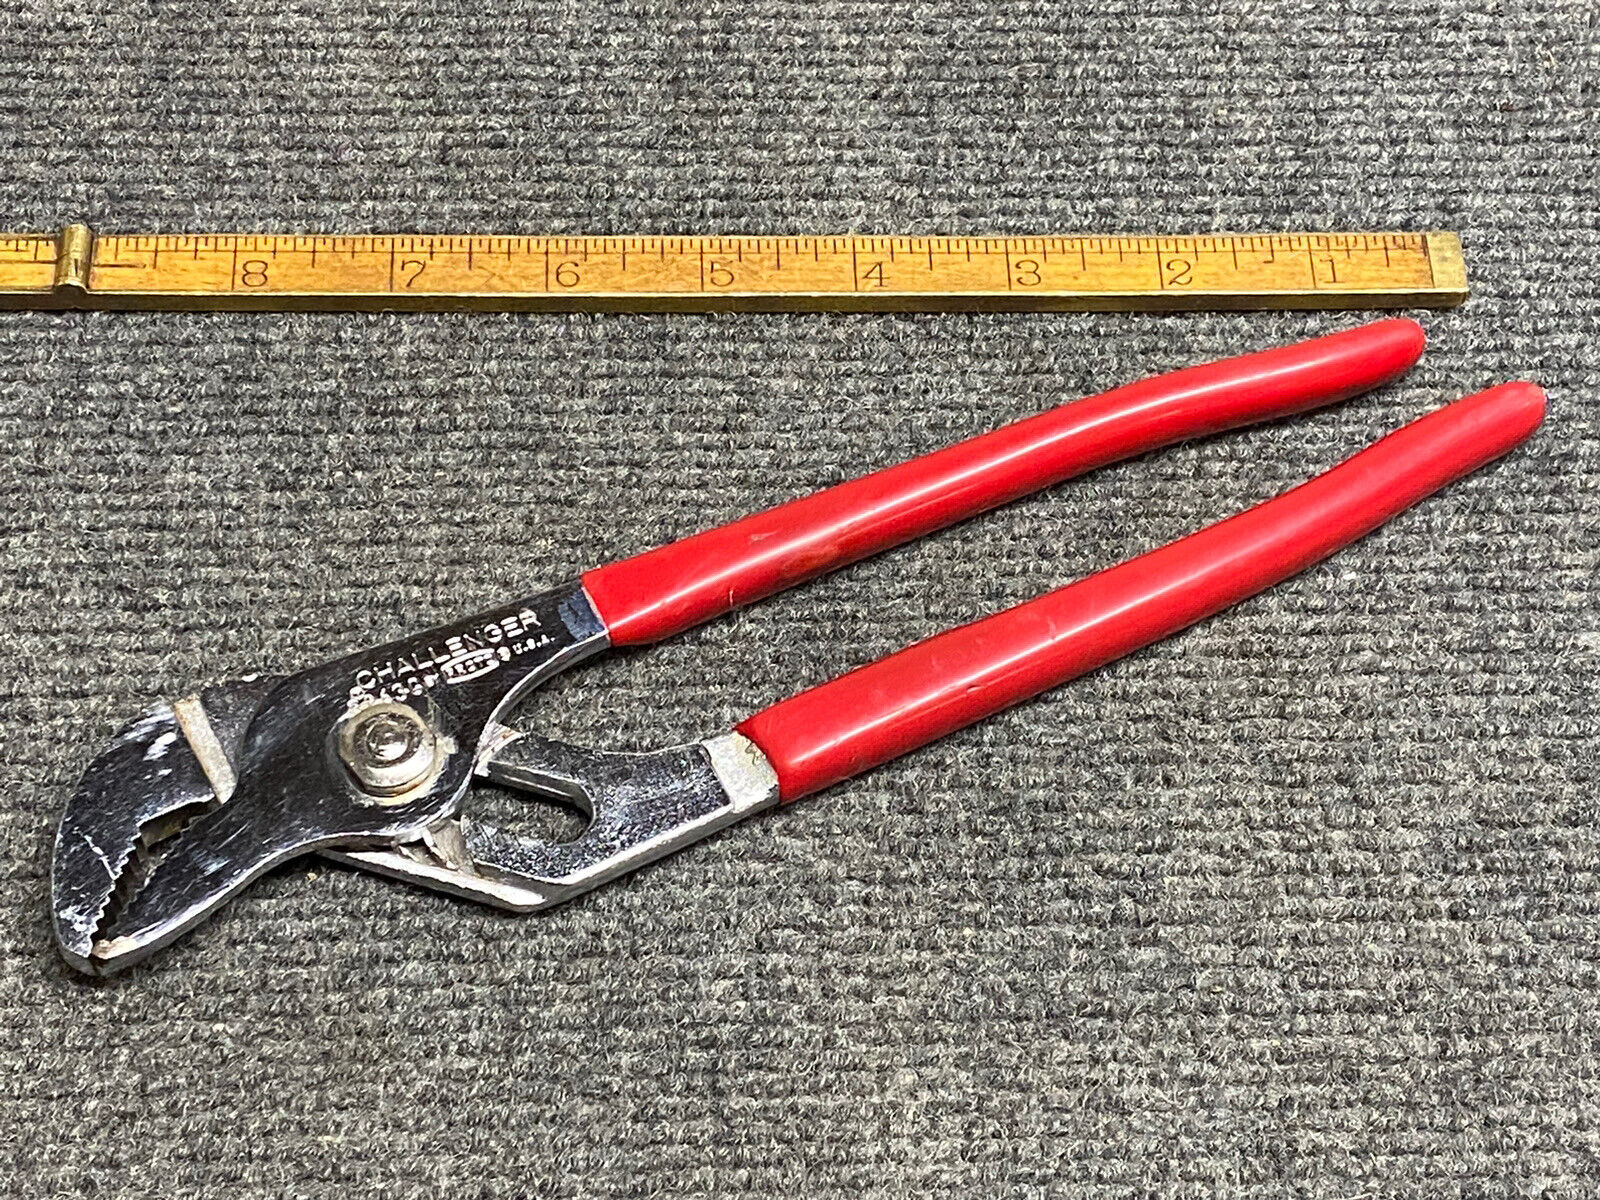 Vintage Proto Challenger 10” Channel Grove Pliers With Soft Red Grips No. 3263-G